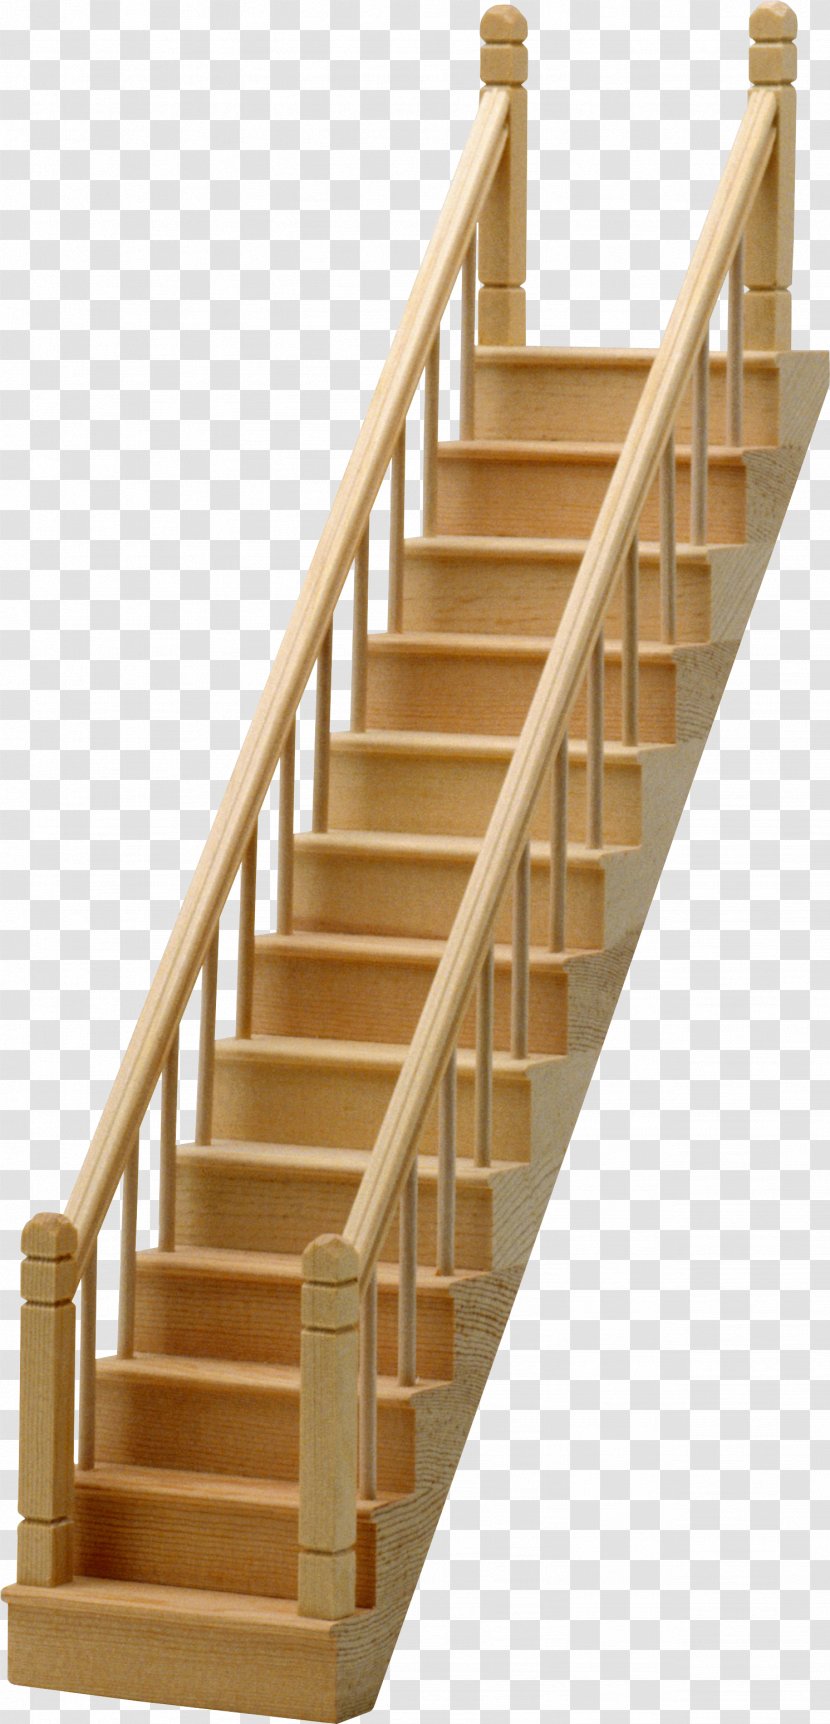 Stairs Clip Art - Structure - Ladder Transparent PNG